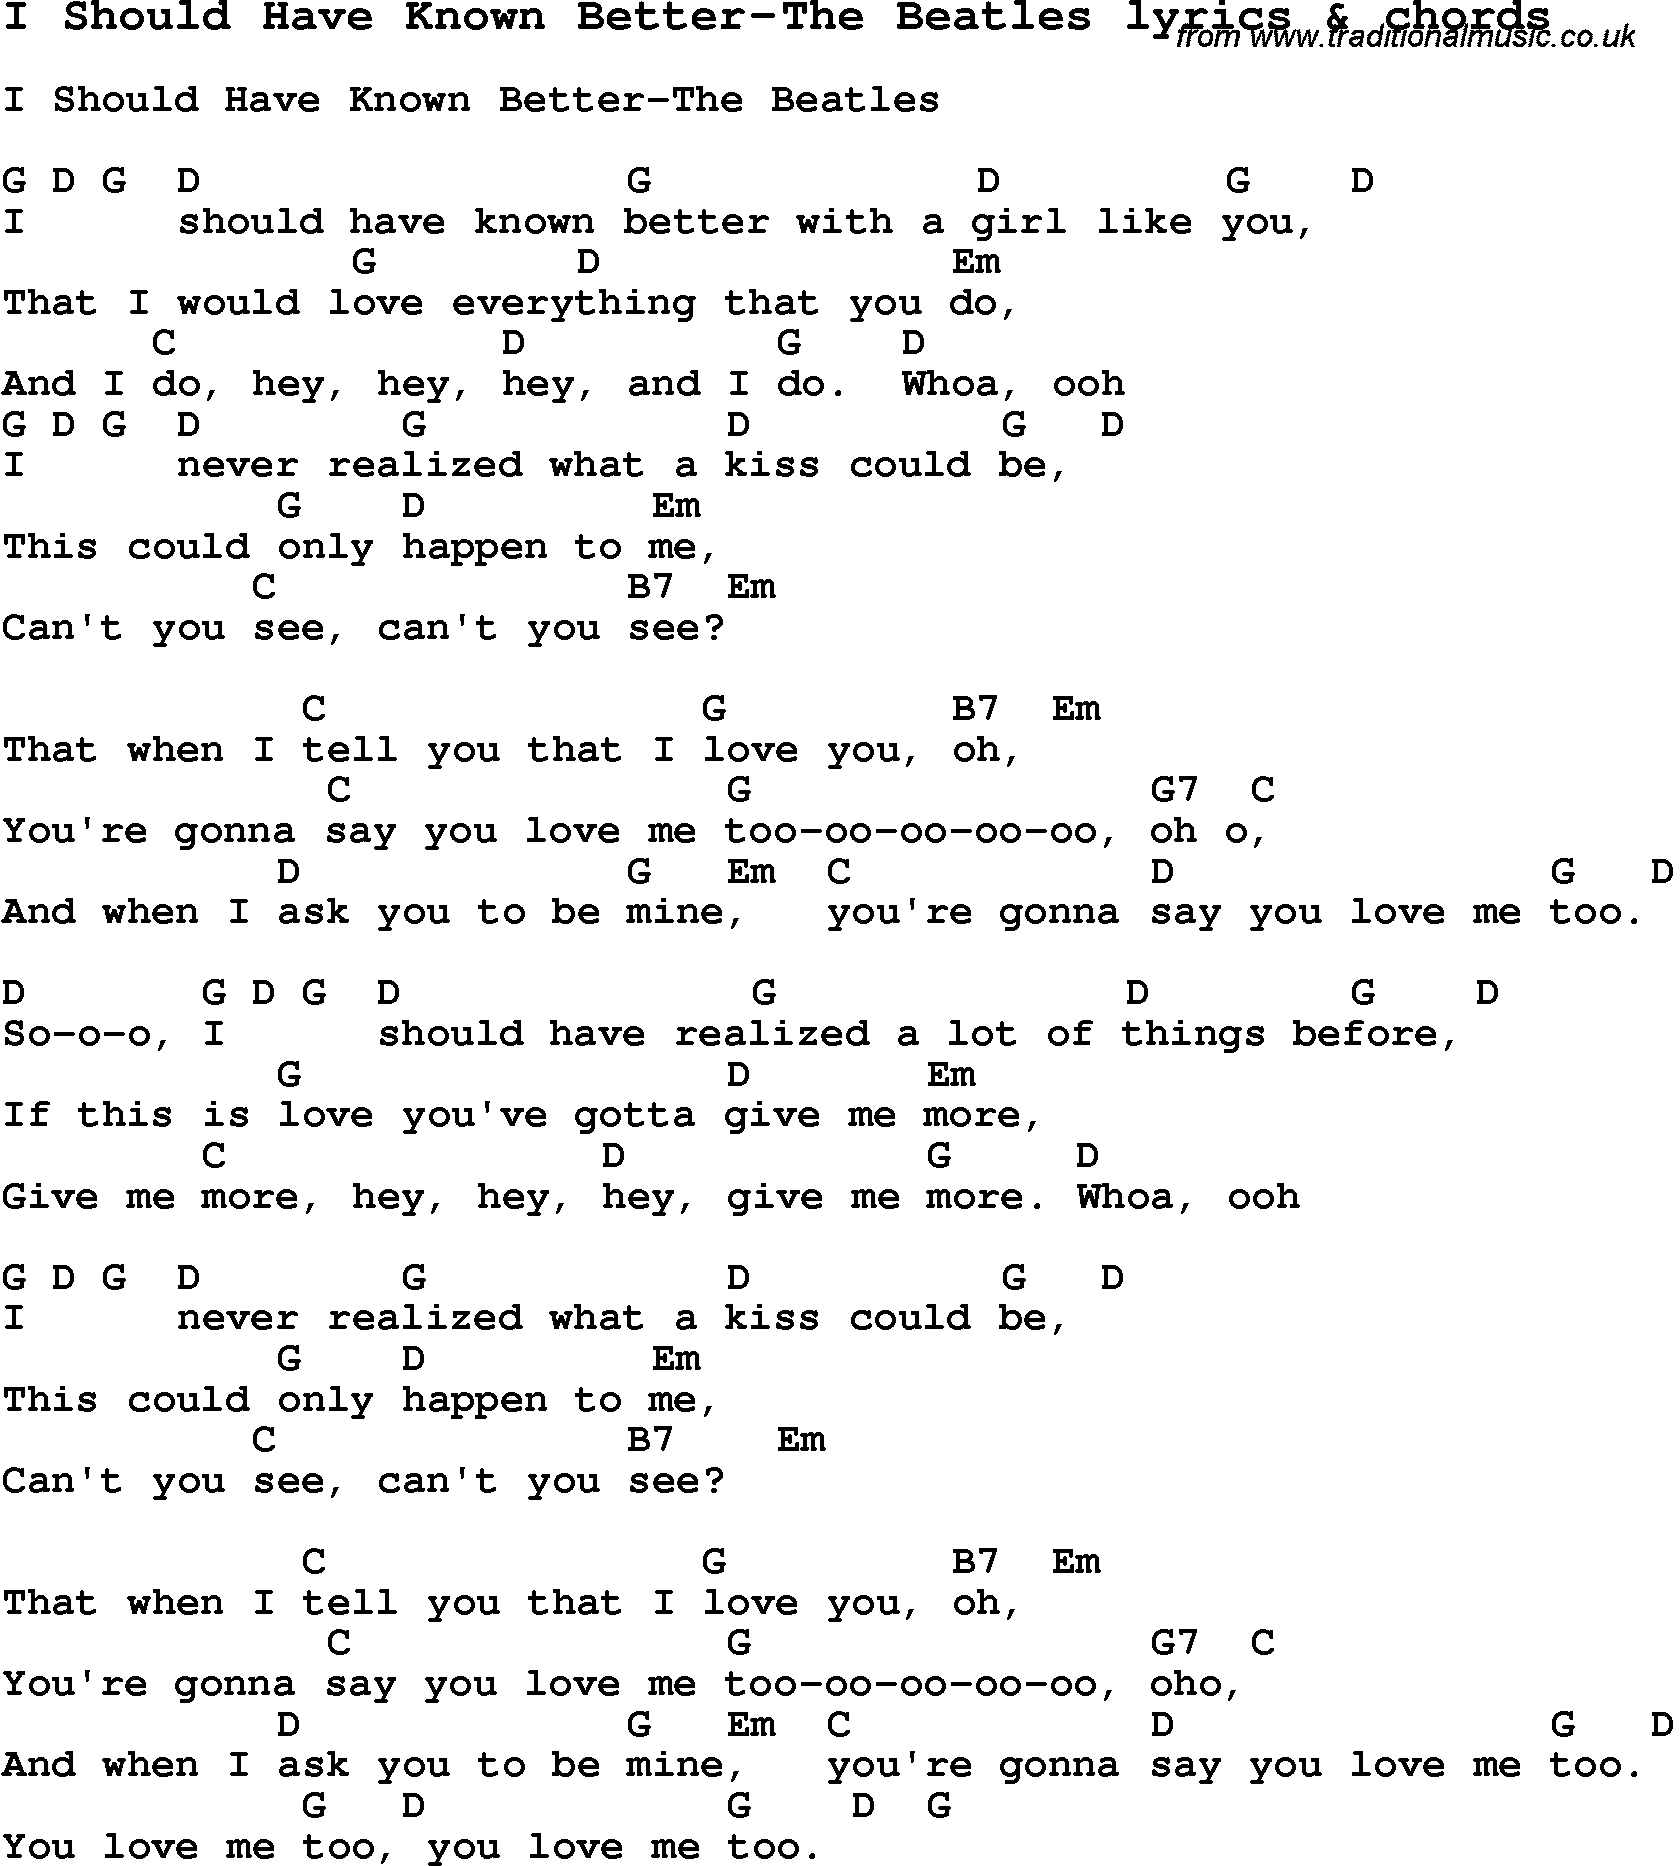 Love Song Lyrics for: I Should Have Known Better-The Beatles with chords for Ukulele, Guitar Banjo etc.